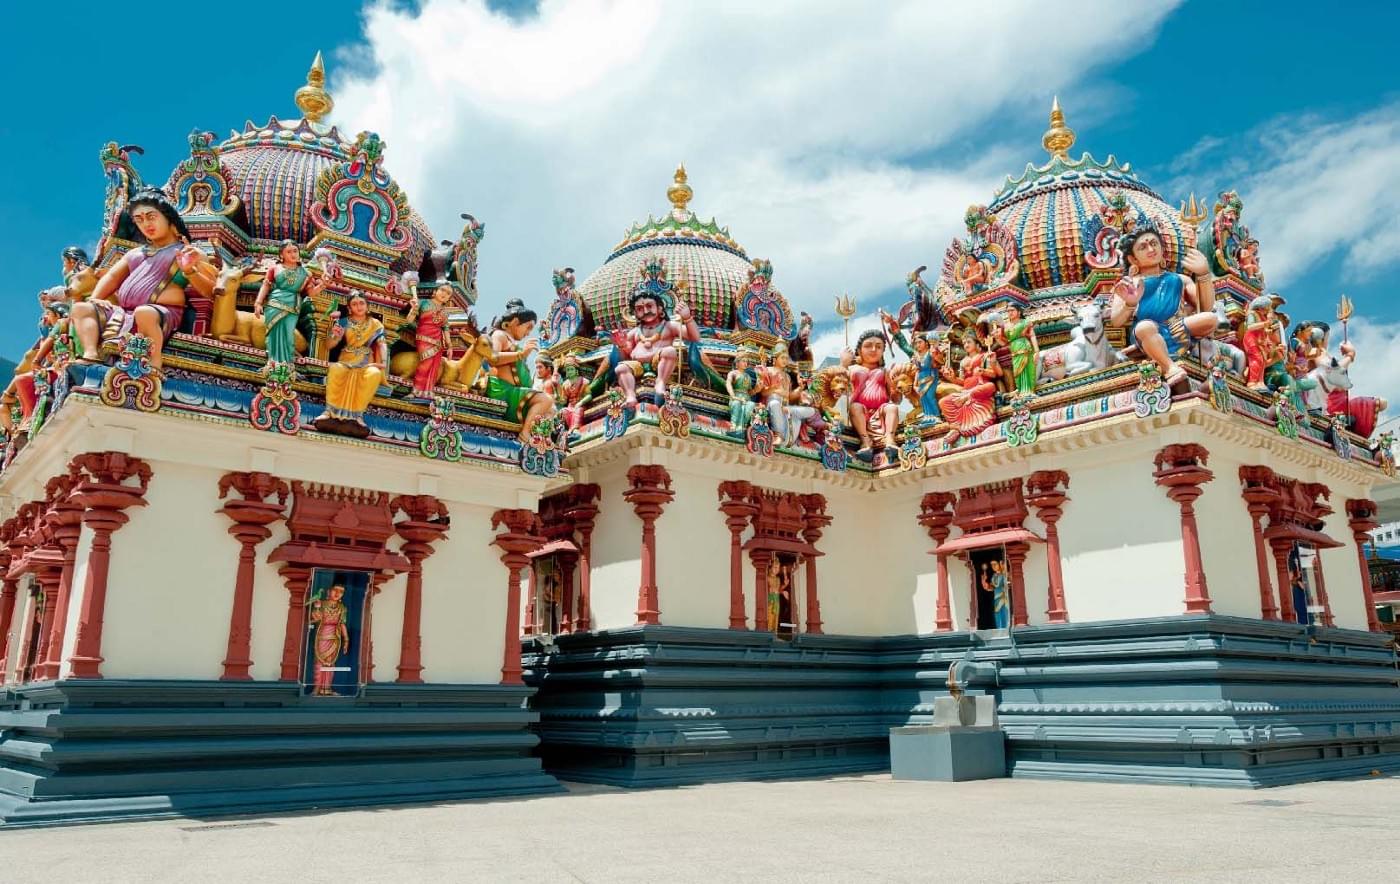 Admire the artistry of the Sri Mariamman Temple when you take the Marina Sightseeing Route